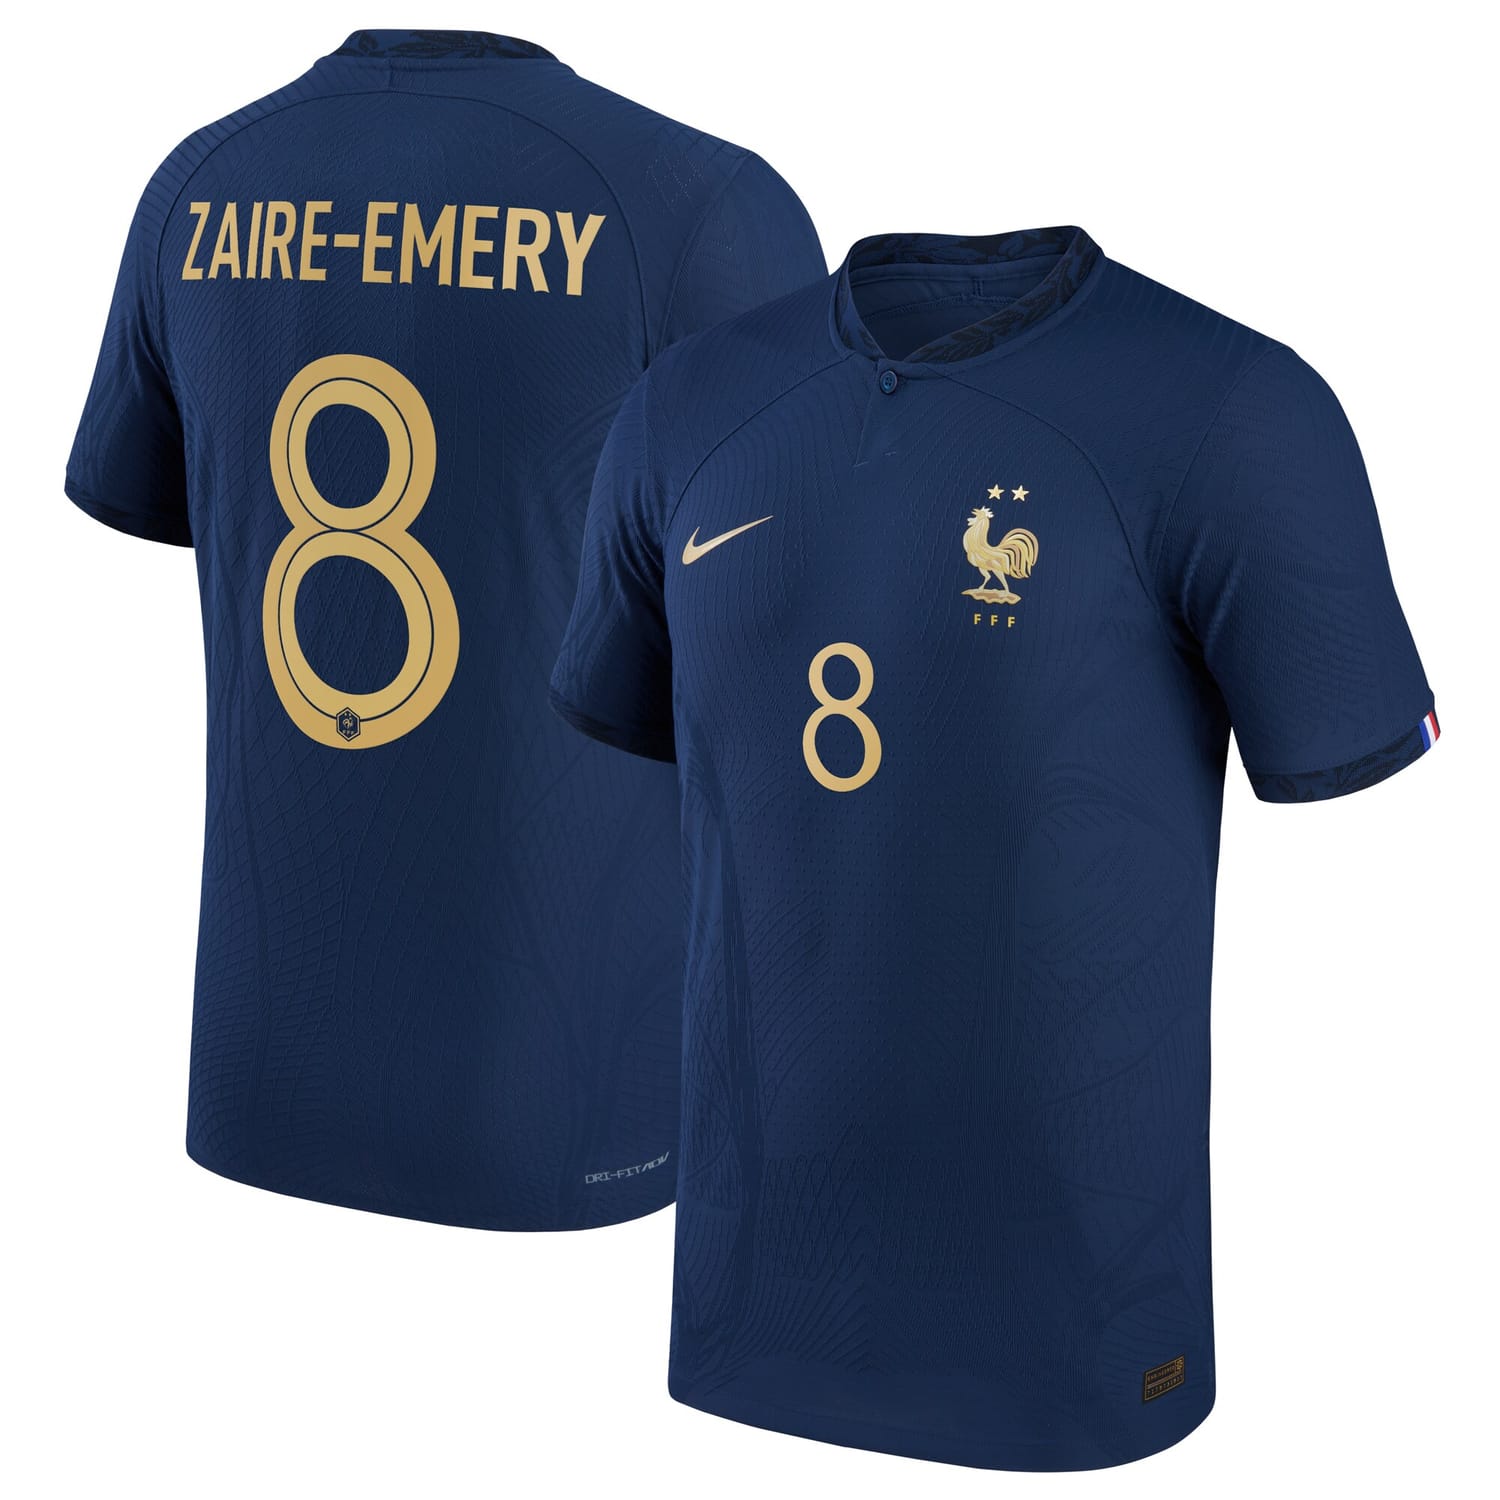 France National Team Home Authentic Jersey Shirt 2022 player Zaire-Emery 8 printing for Men